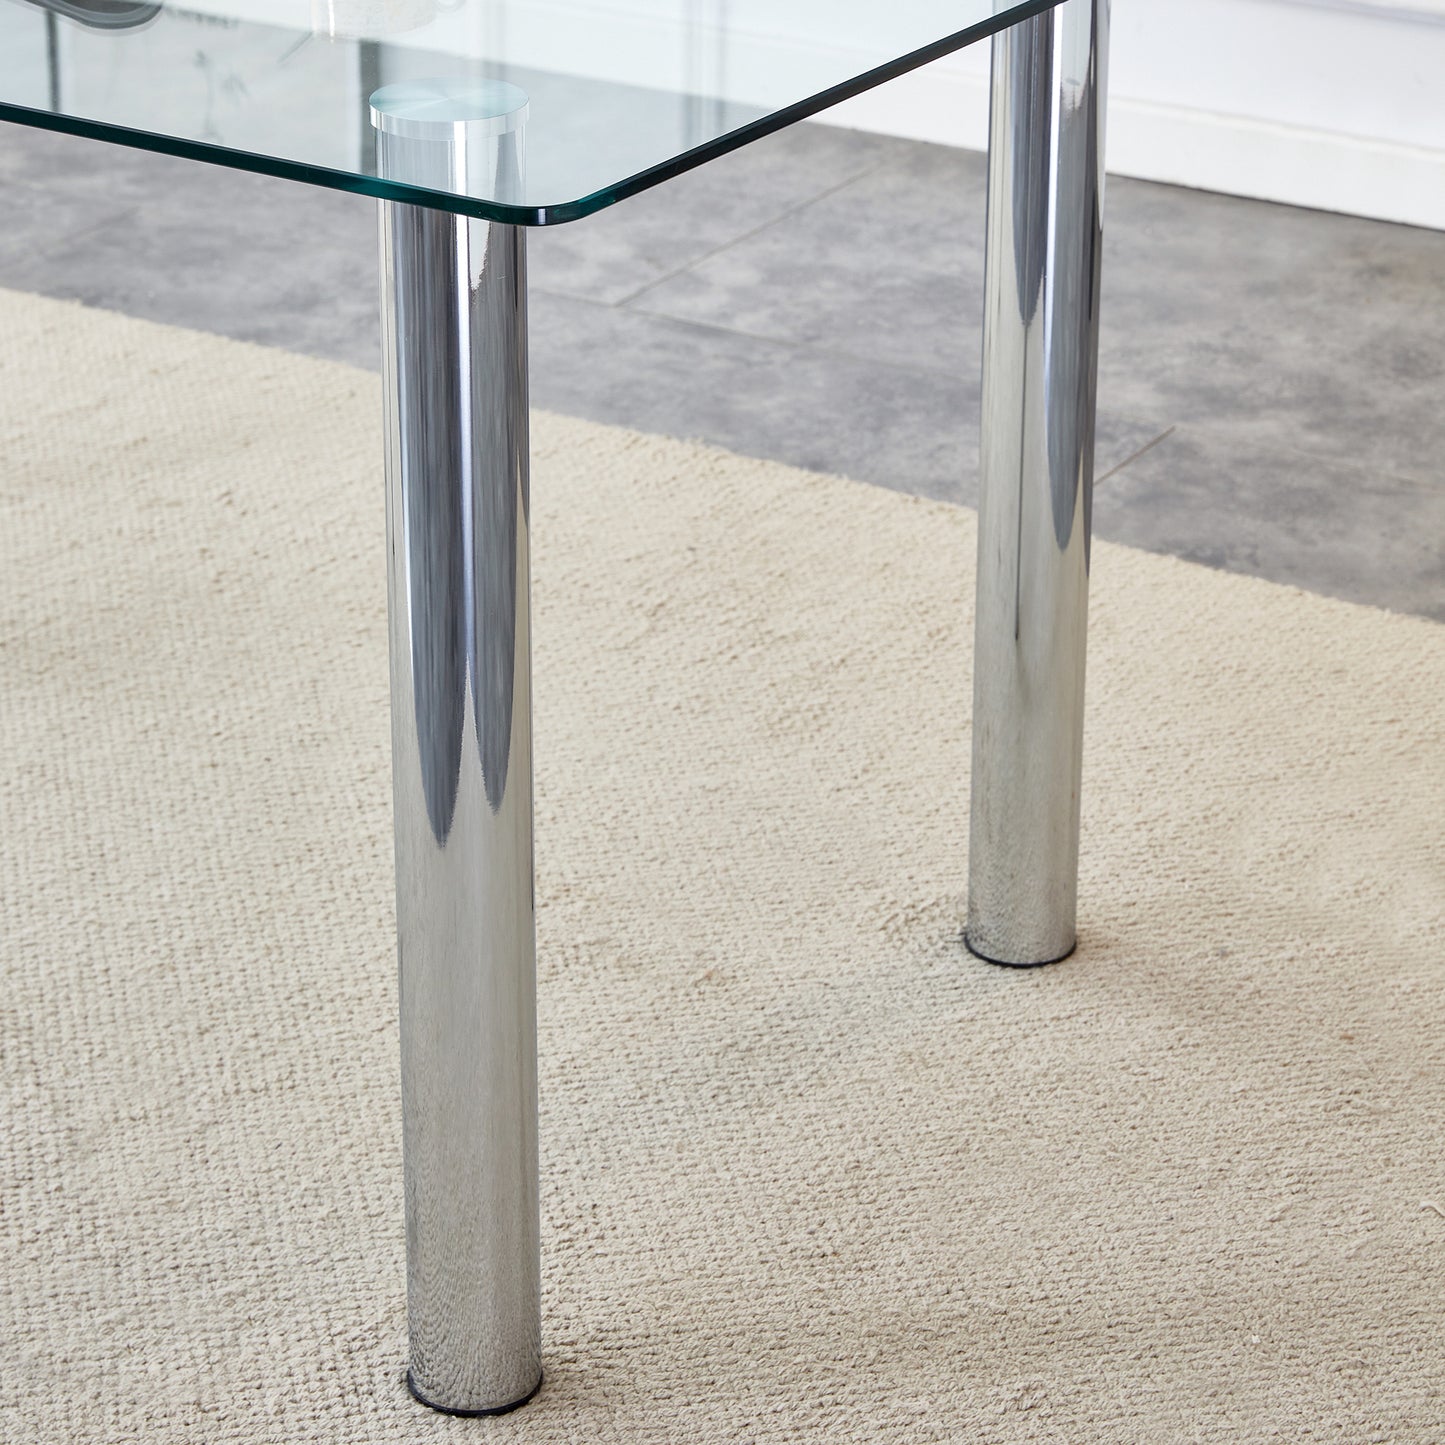 A modern minimalist style glass dining table. Transparent tempered glass tabletop with a thickness of 0.3 feet and silver metal legs. Suitable for restaurants and living rooms. 63 "* 35.4" * 30"